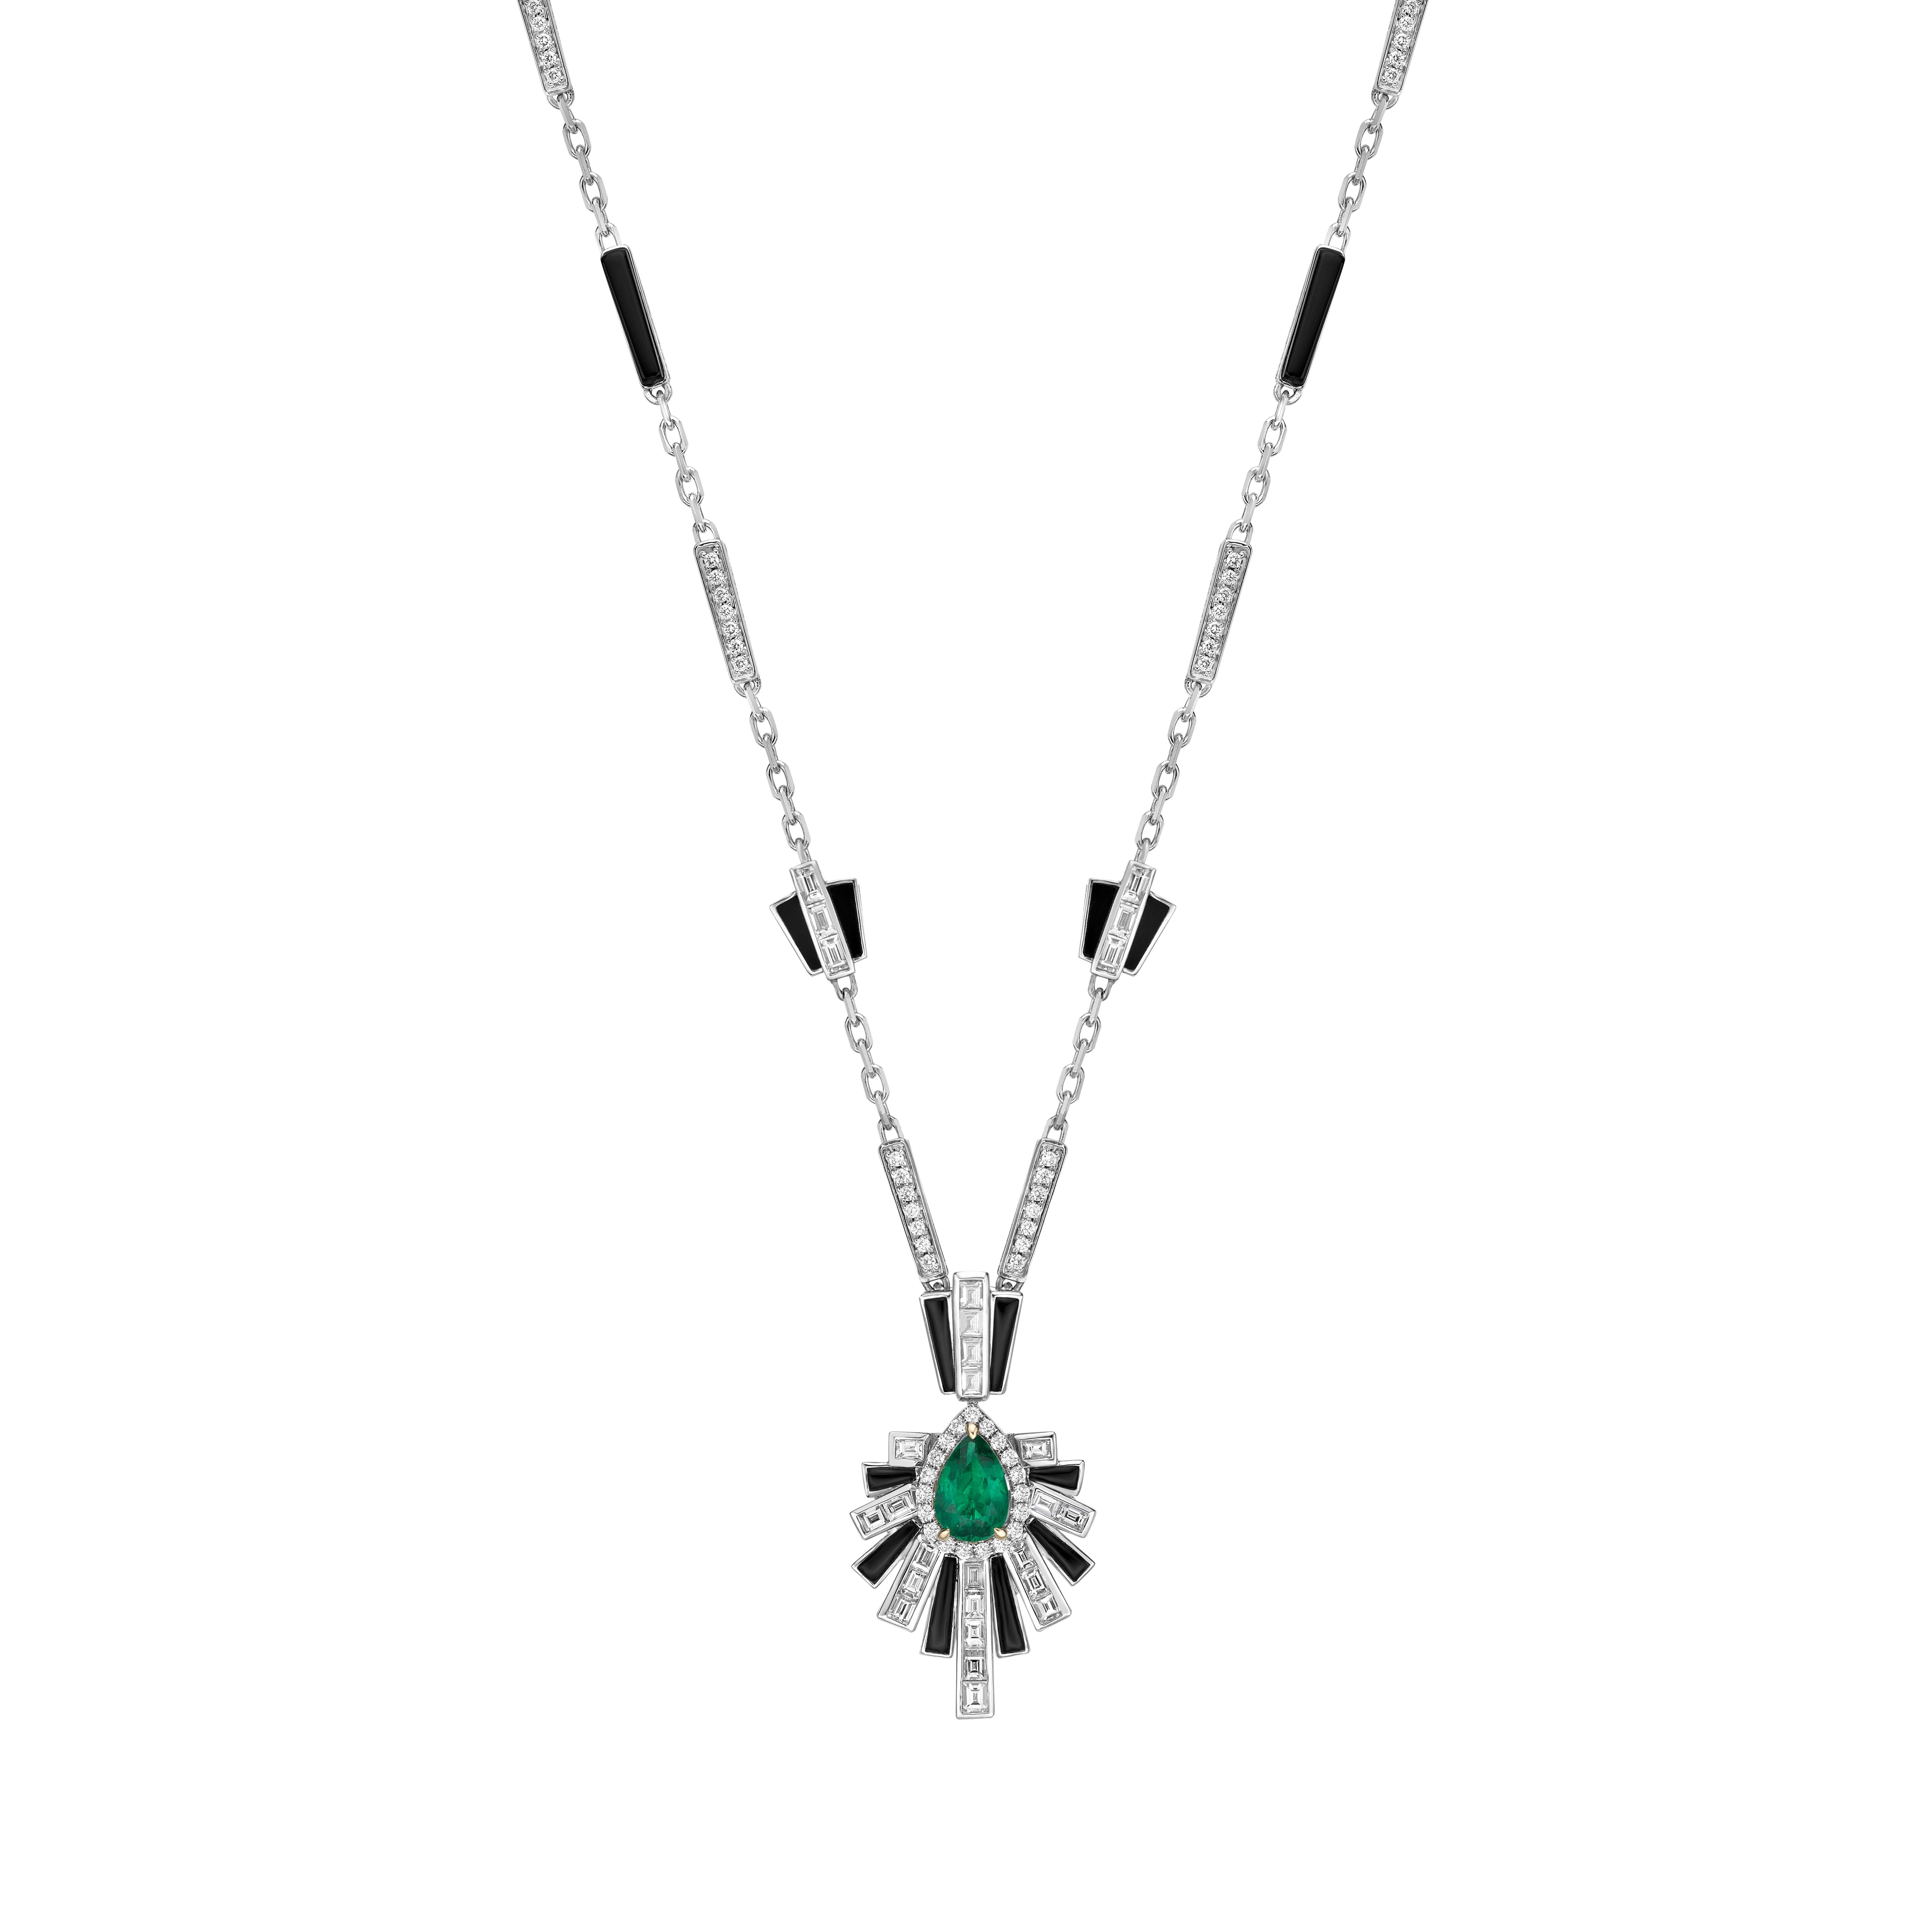 Pear Cut Art Deco Style Emerald, Black Onyx and Diamond Necklace in 18 Karat White Gold